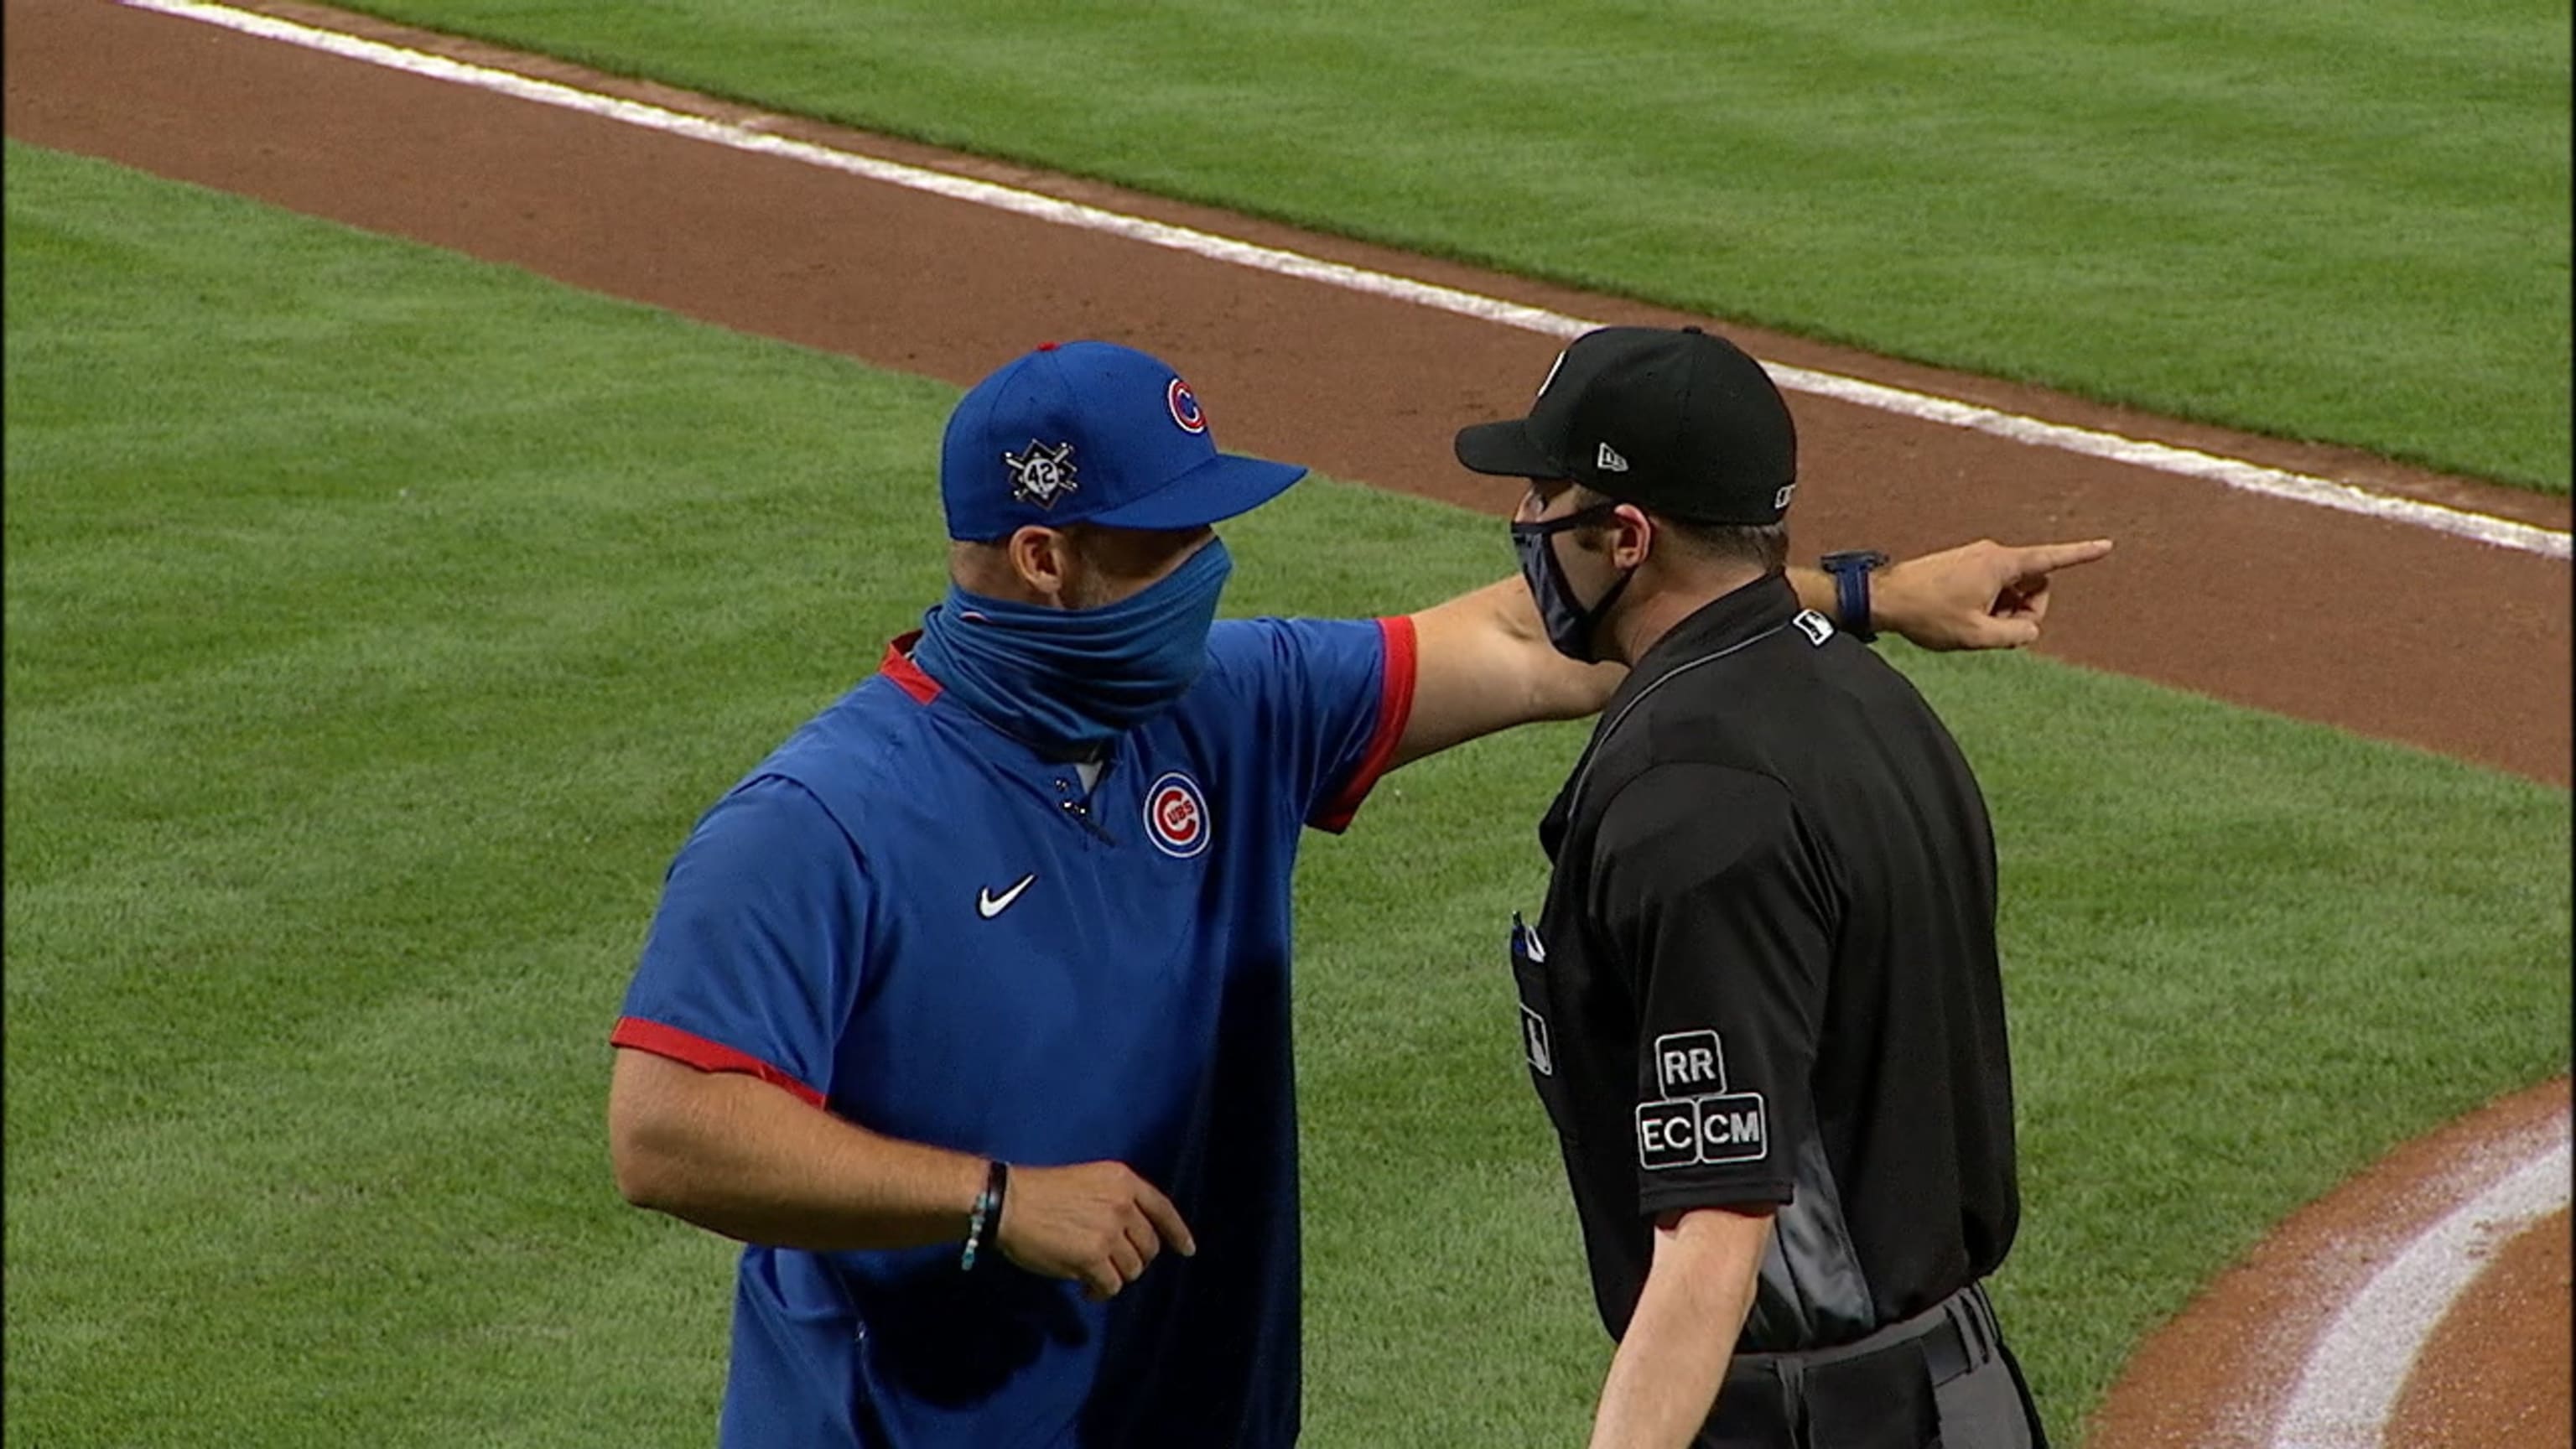 David Ross, David Bell among ejections in Cubs-Reds Game 2